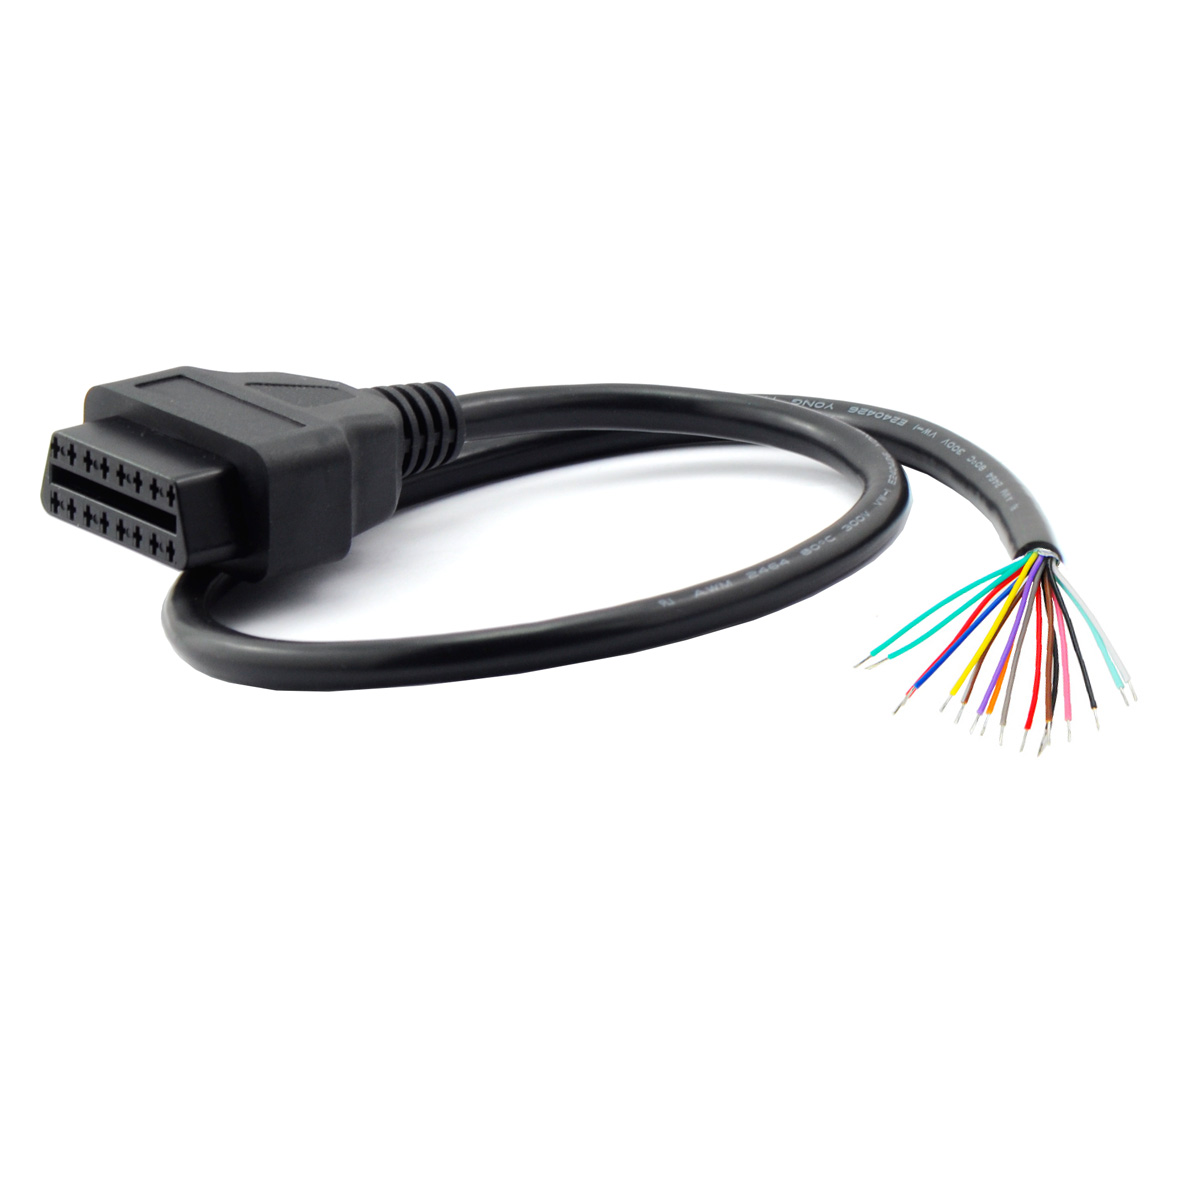 60cm 16-Pin OBD2 Female Connector Pigtail DIY Cable Cord